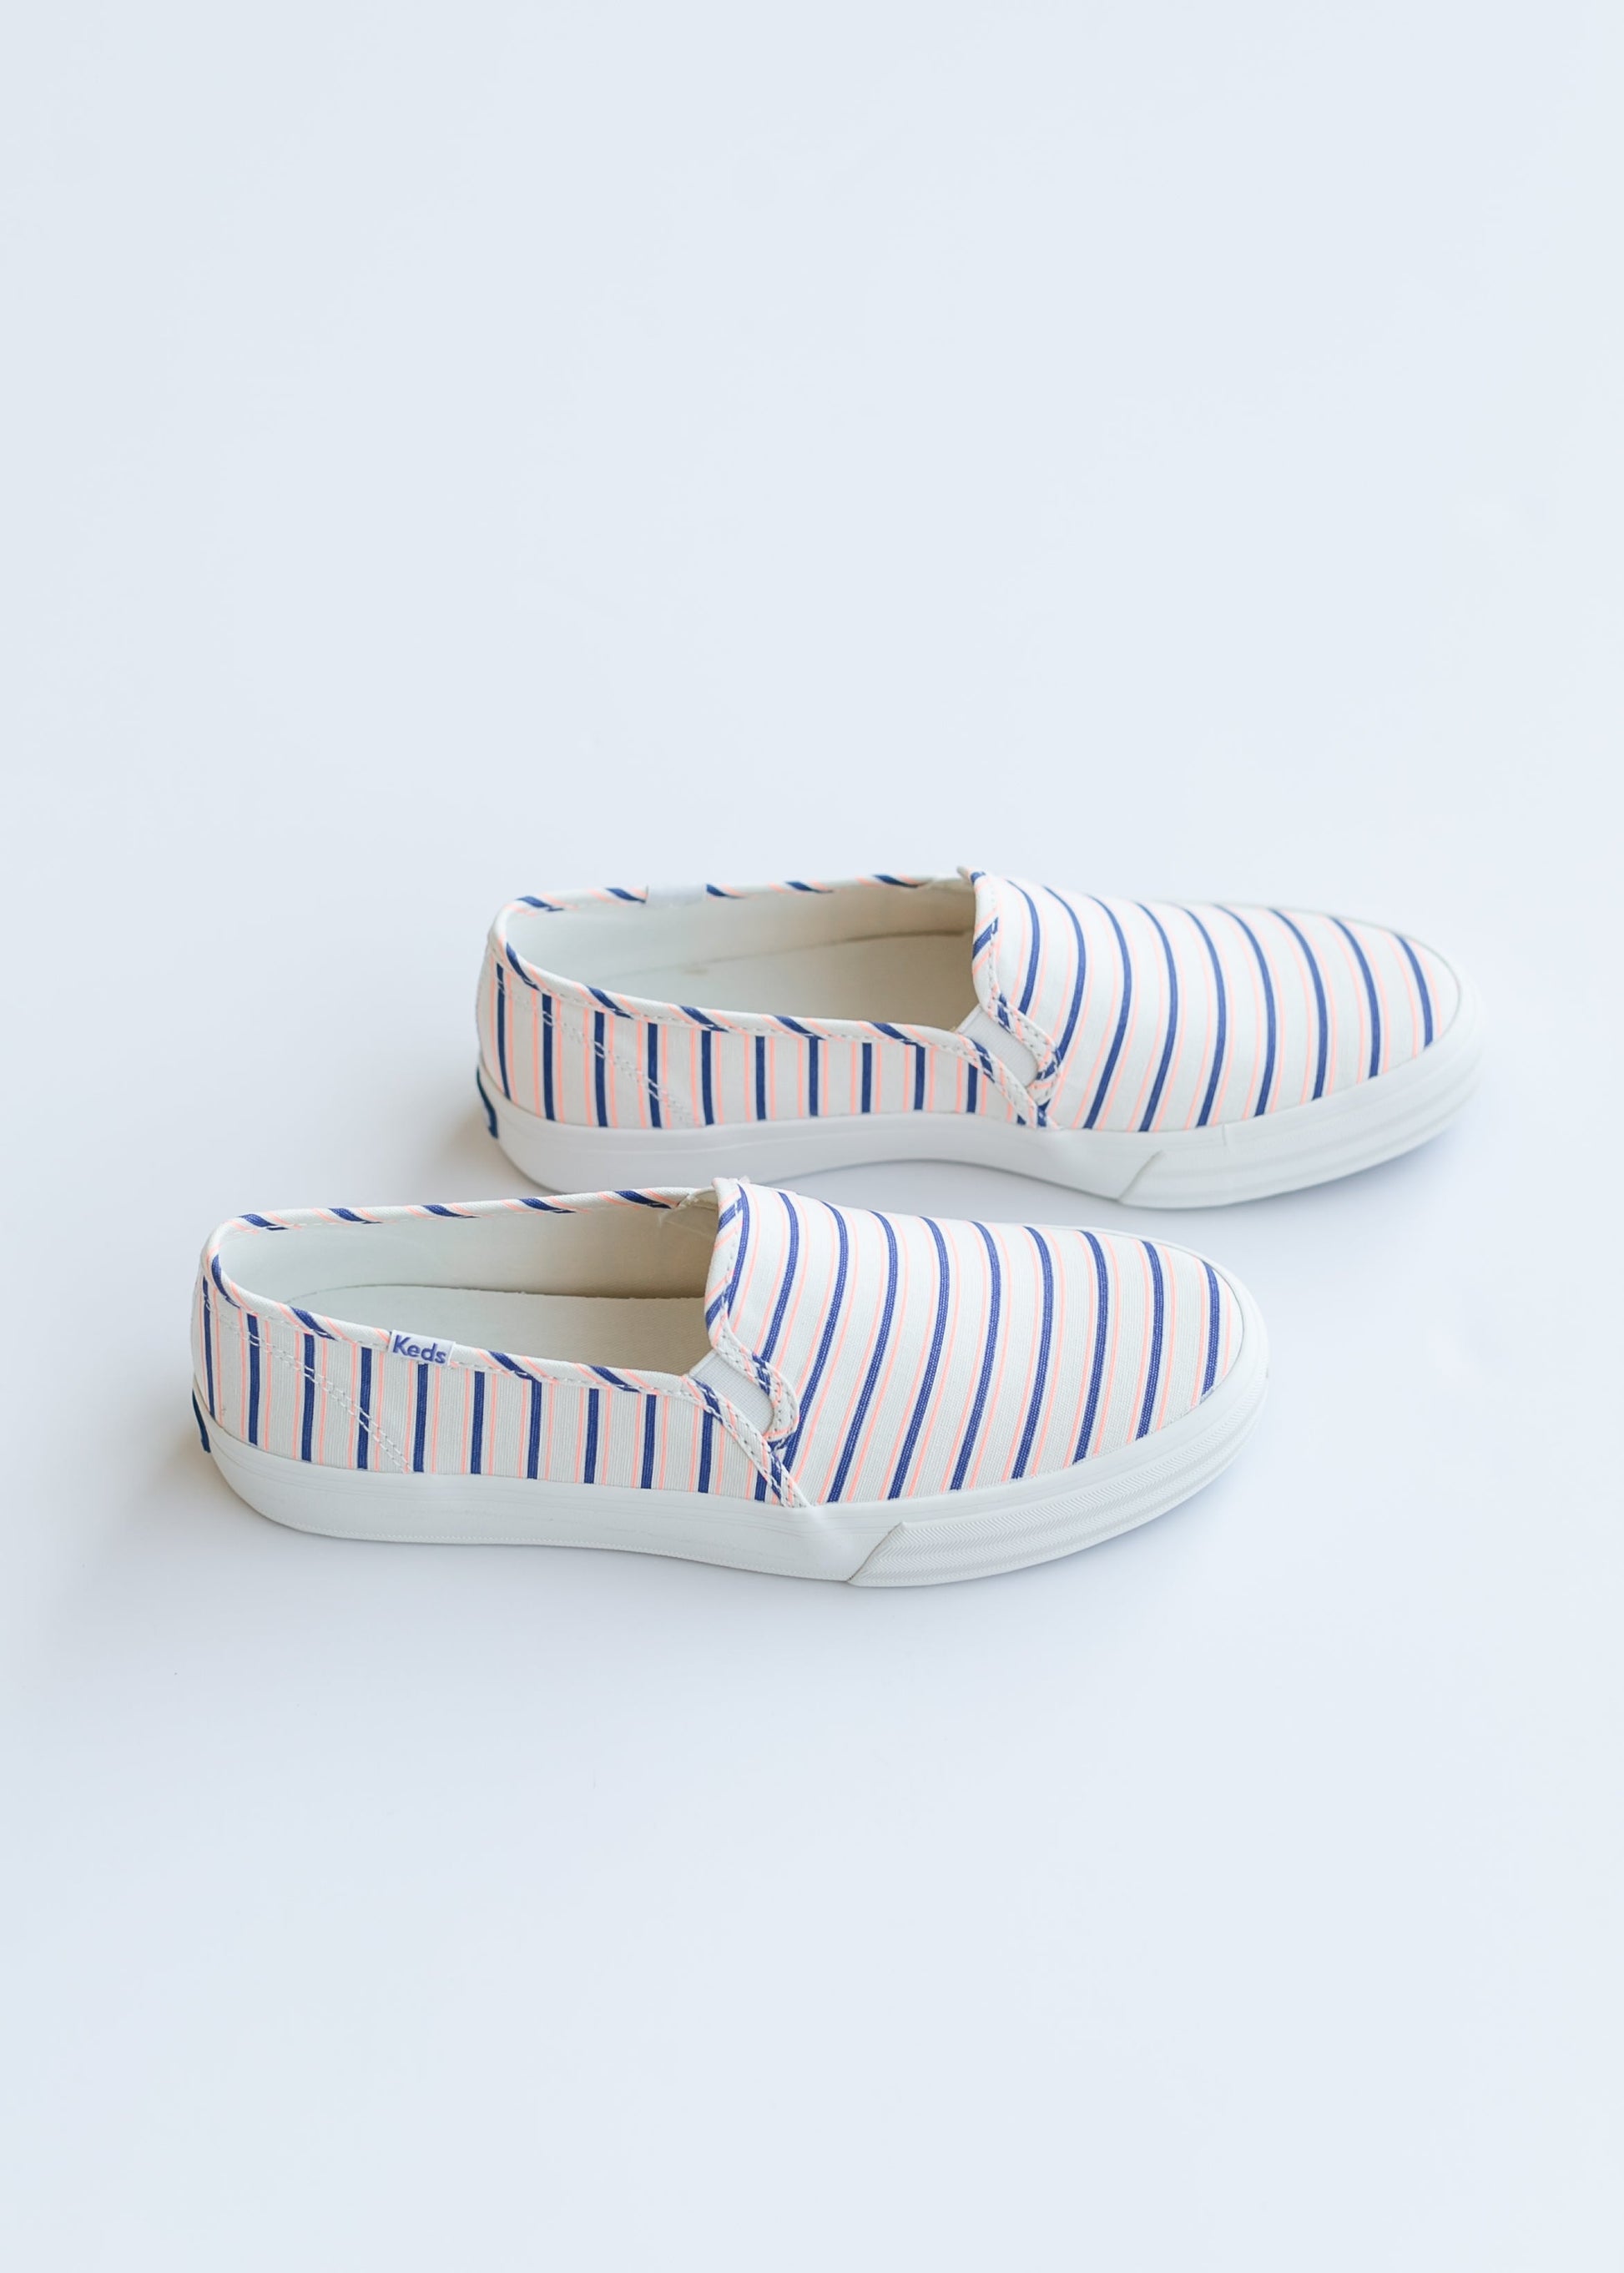 Keds® Double Decker Striped Sneakers Shoes